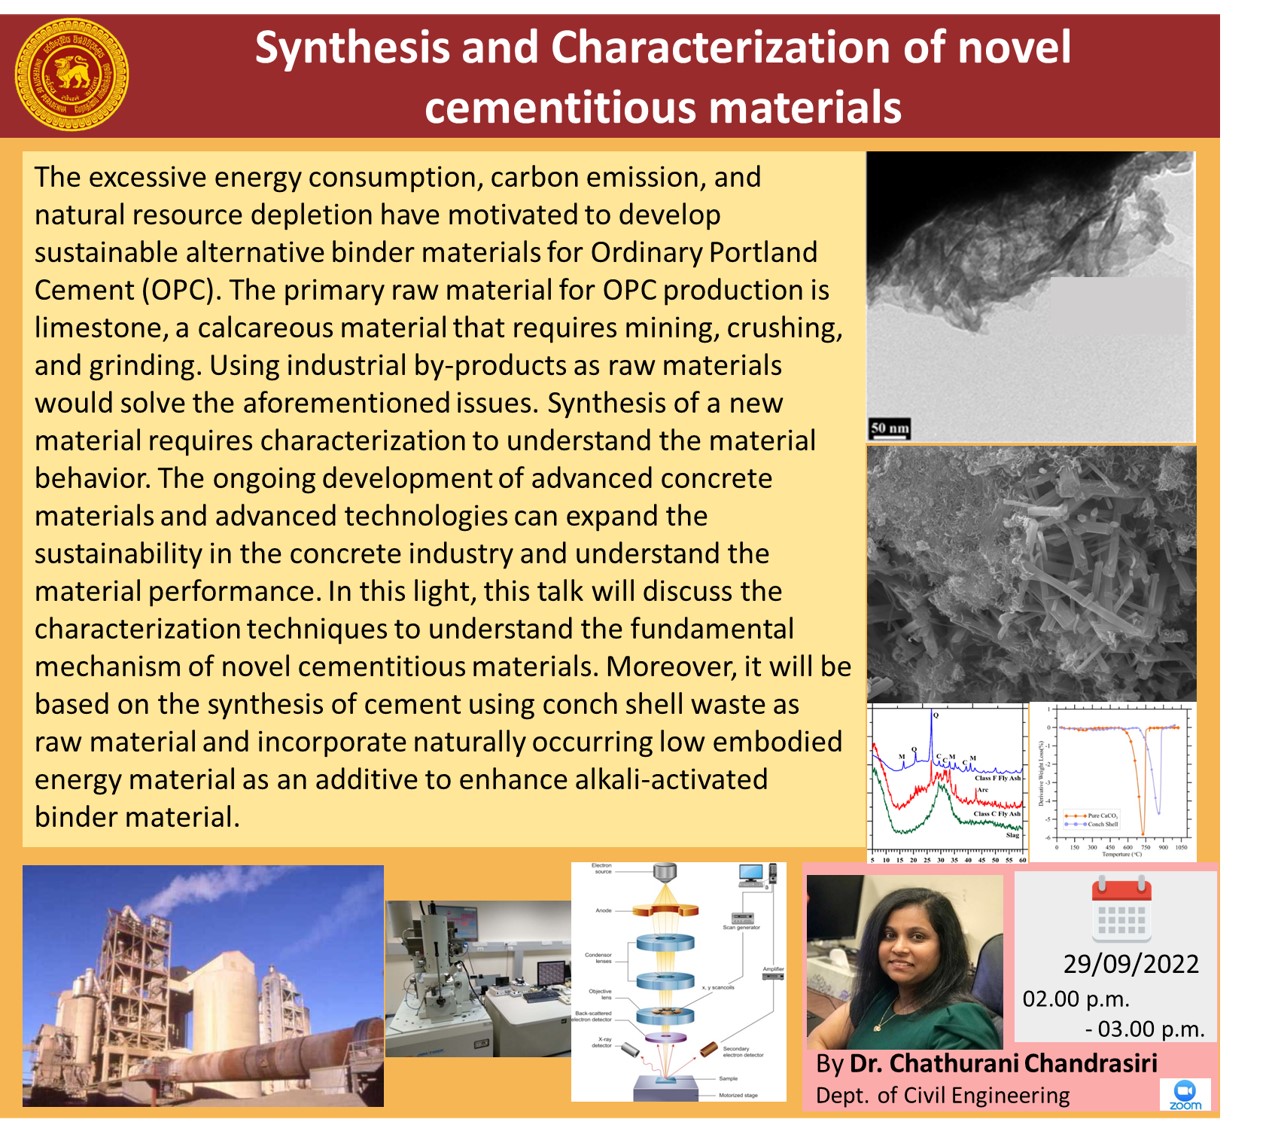 Synthesis and Characterization of Novel Cementitious Materials